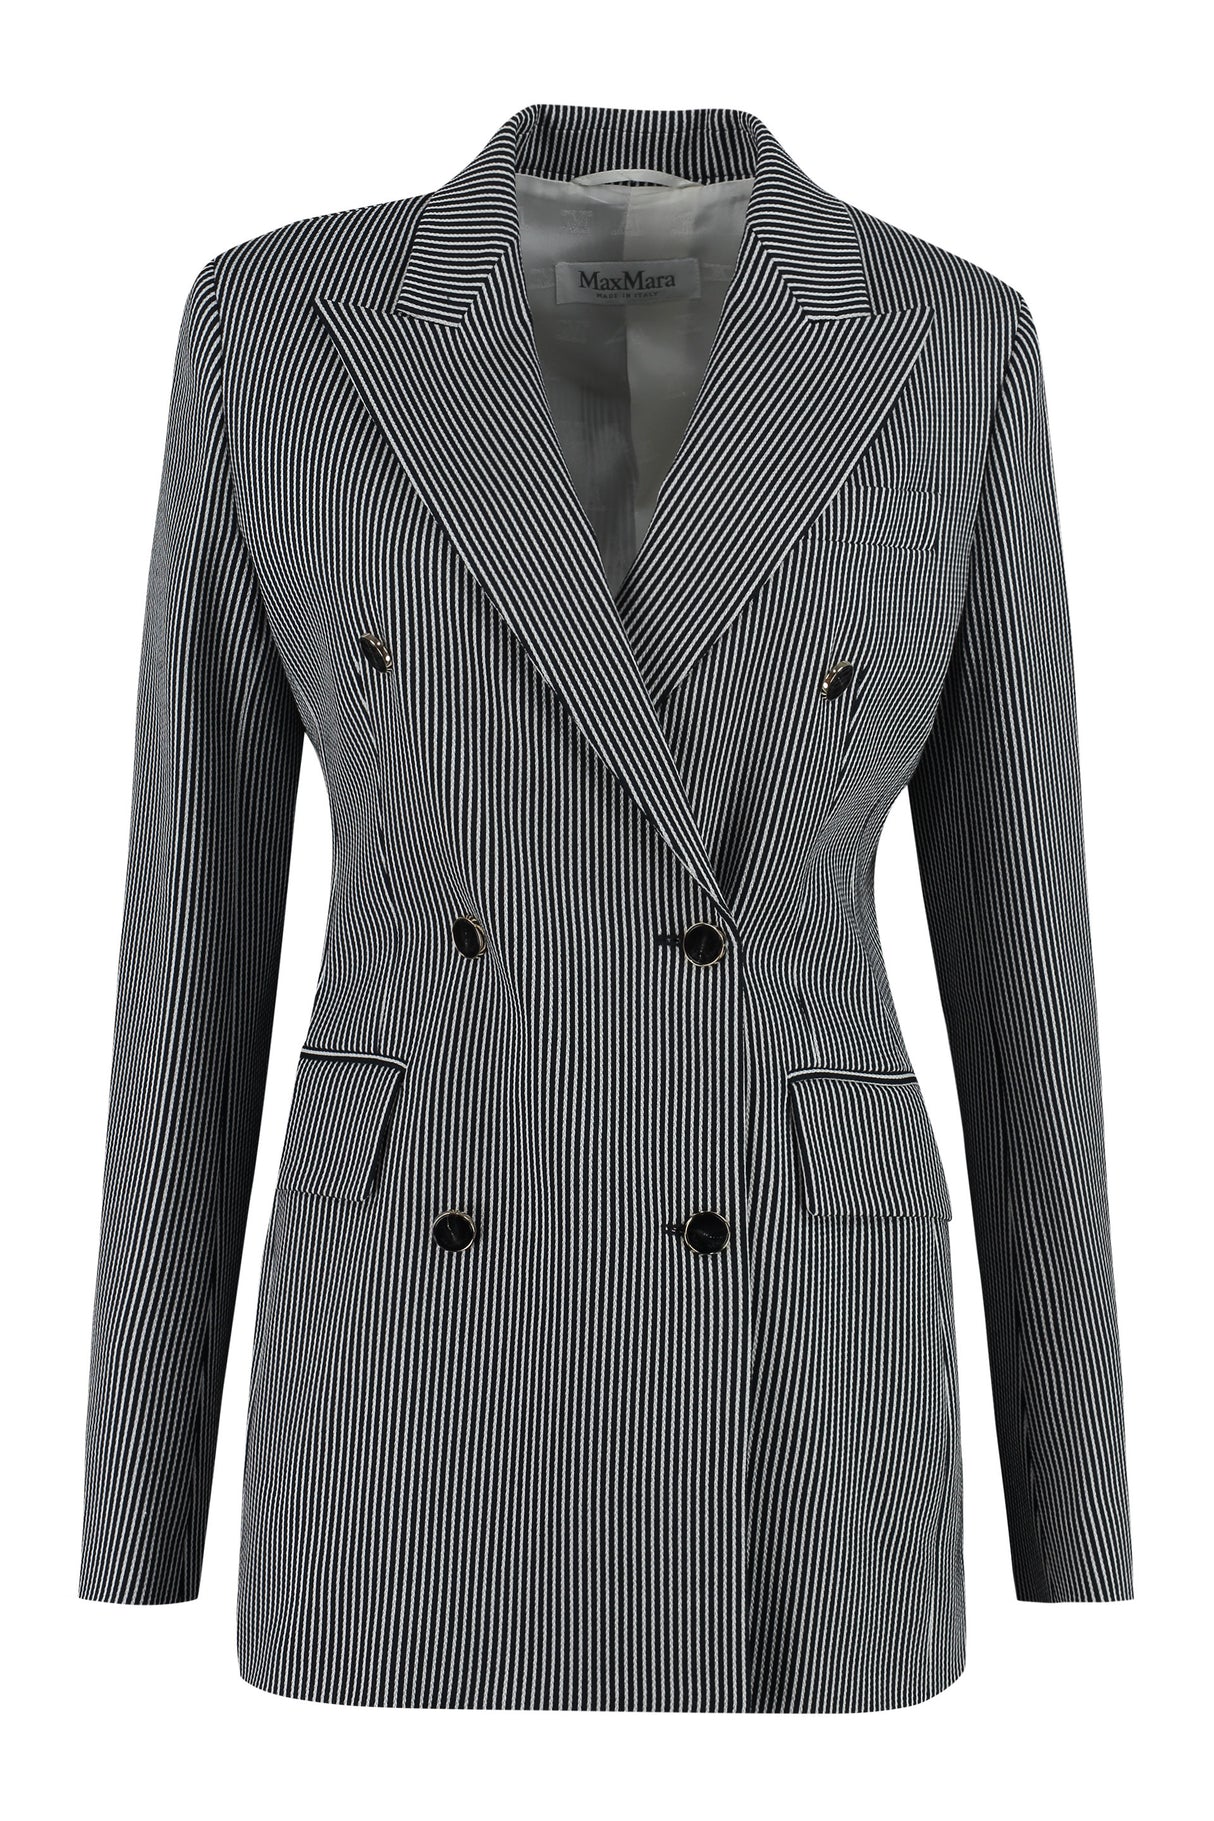 MAX MARA Striped Double Breasted Blazer for Women - Perfect for SS23